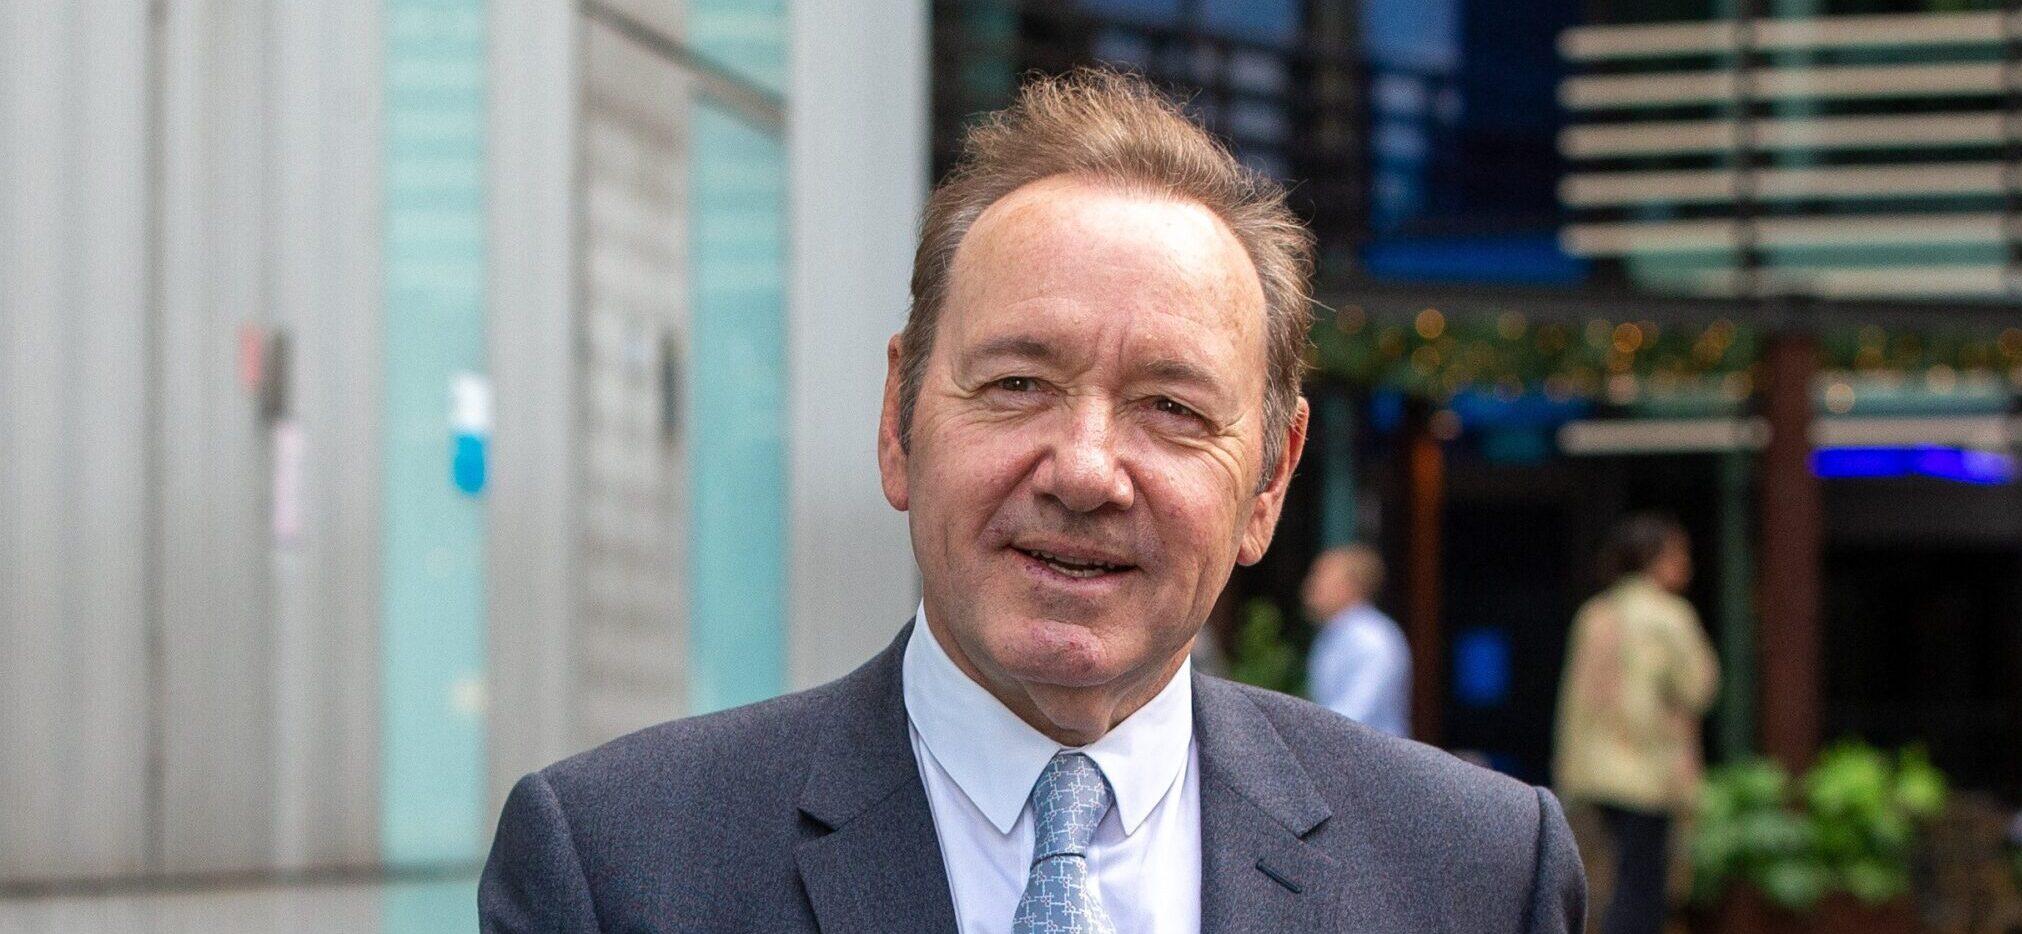 Kevin Spacey at London court for trial over sex offence charges